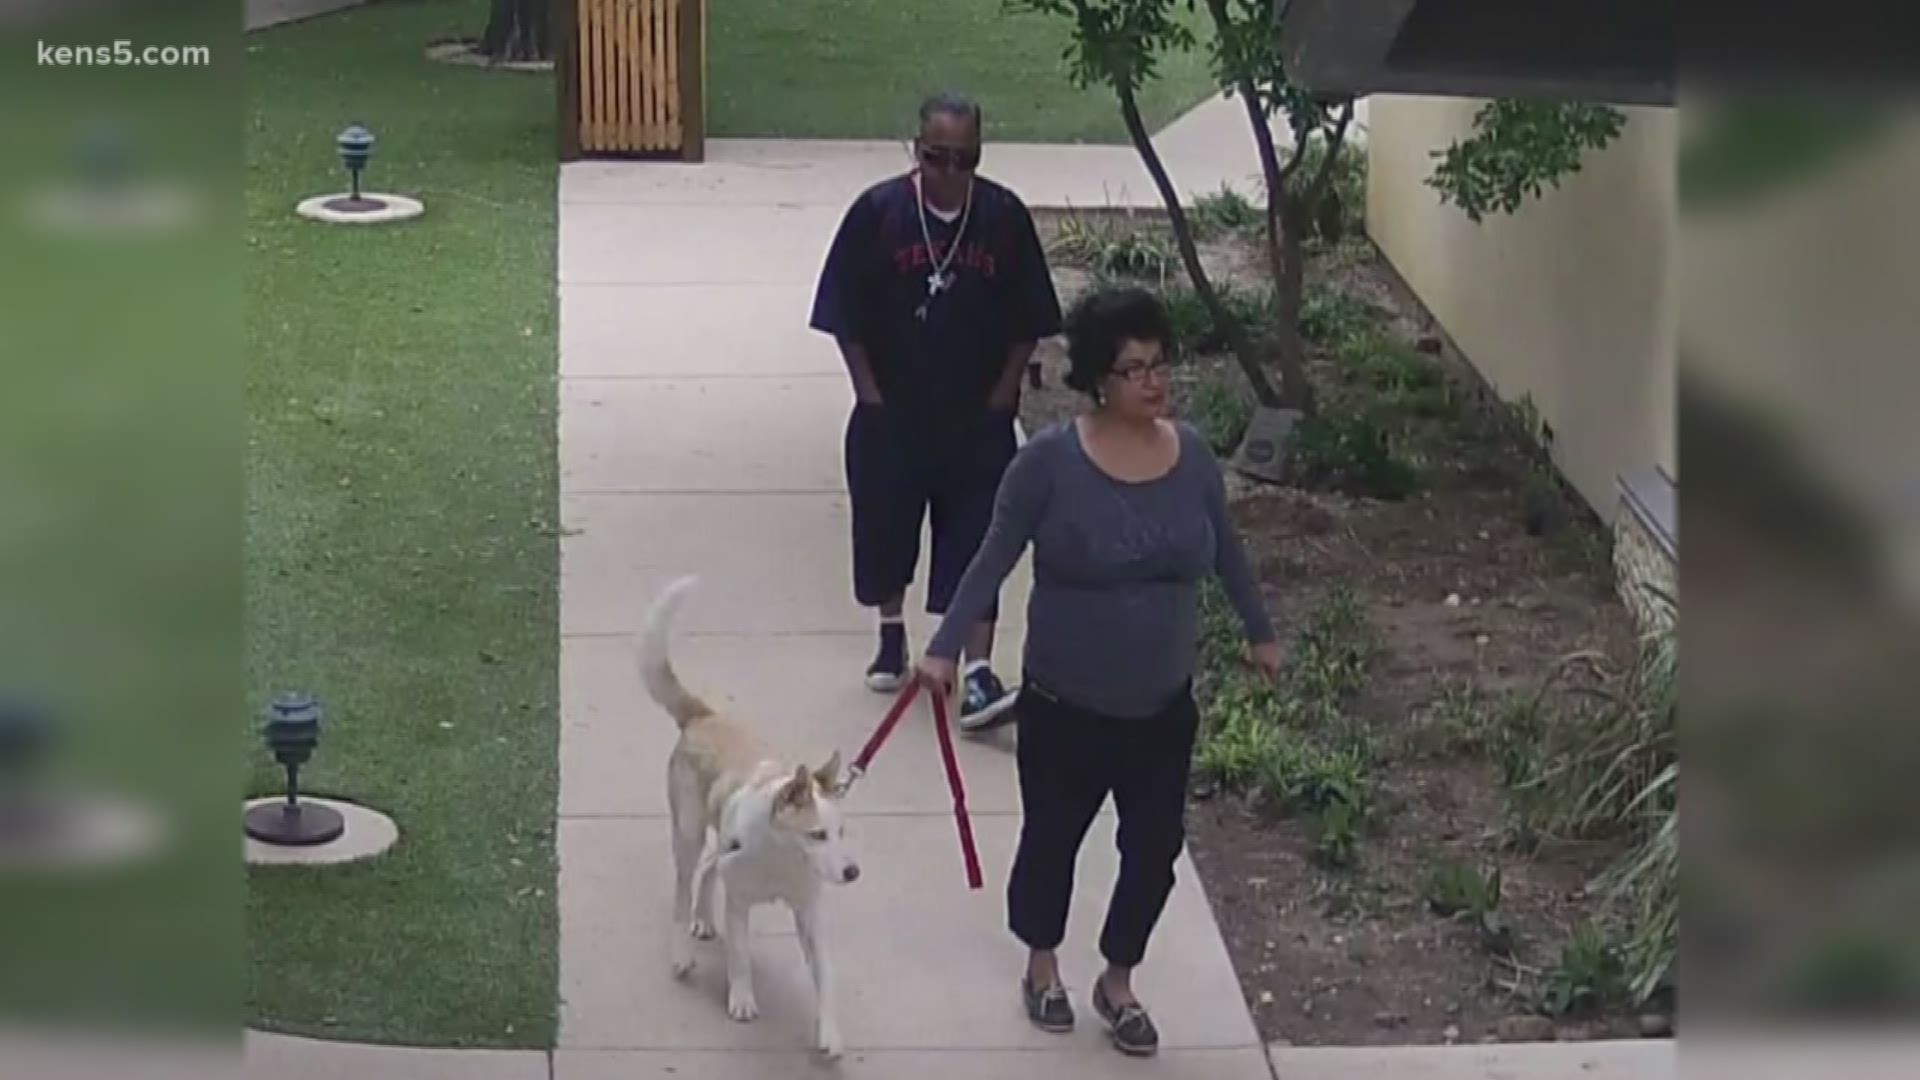 The San Antonio Humane Society is asking for the public's help after a 9-month-old puppy was taken from their shelter on Saturday afternoon.